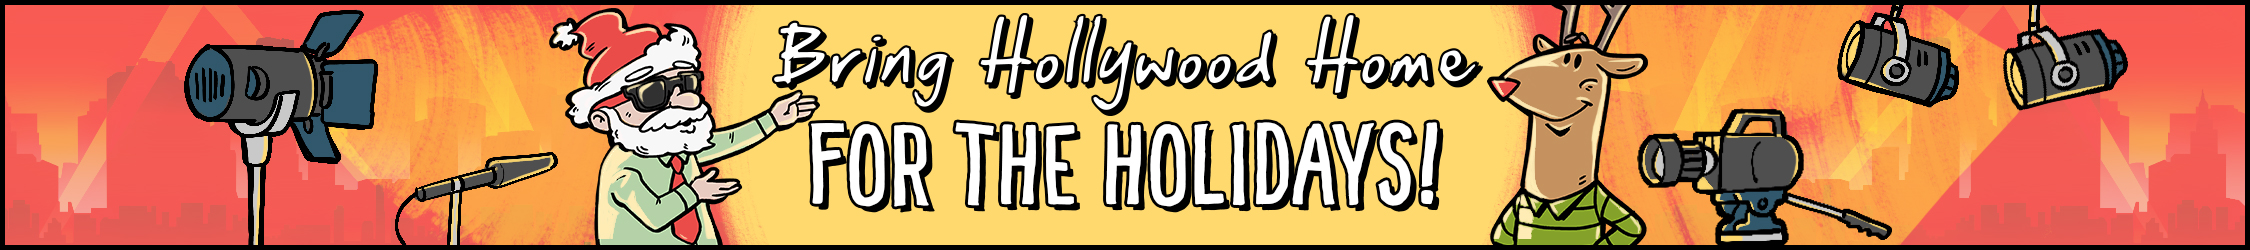 Bring Hollywood Home for the Holidays